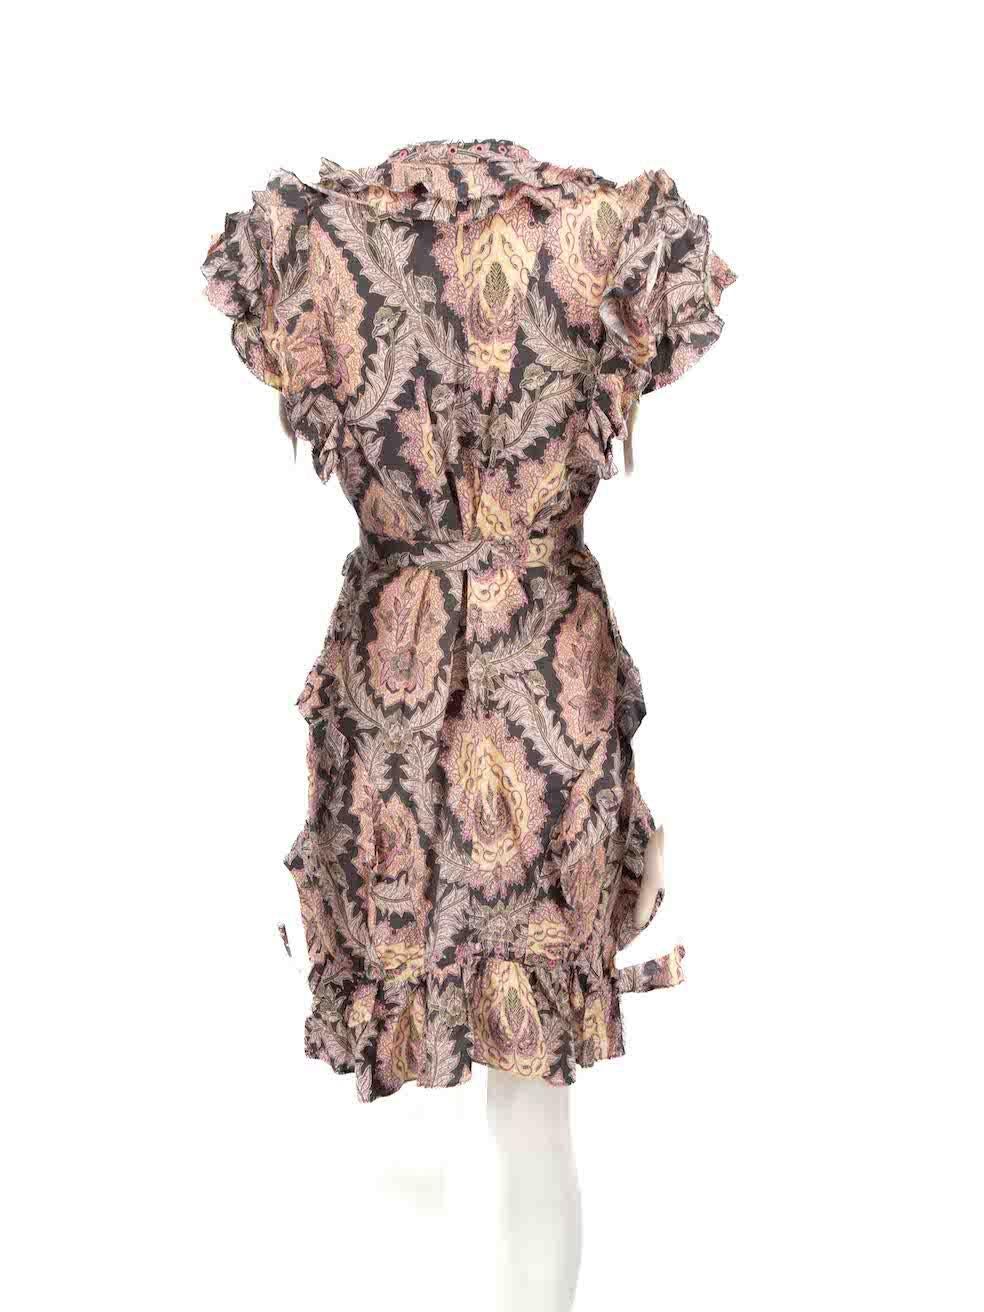 Isabel Marant Floral Pattern Eyelet Detail Dress Size S In Excellent Condition For Sale In London, GB